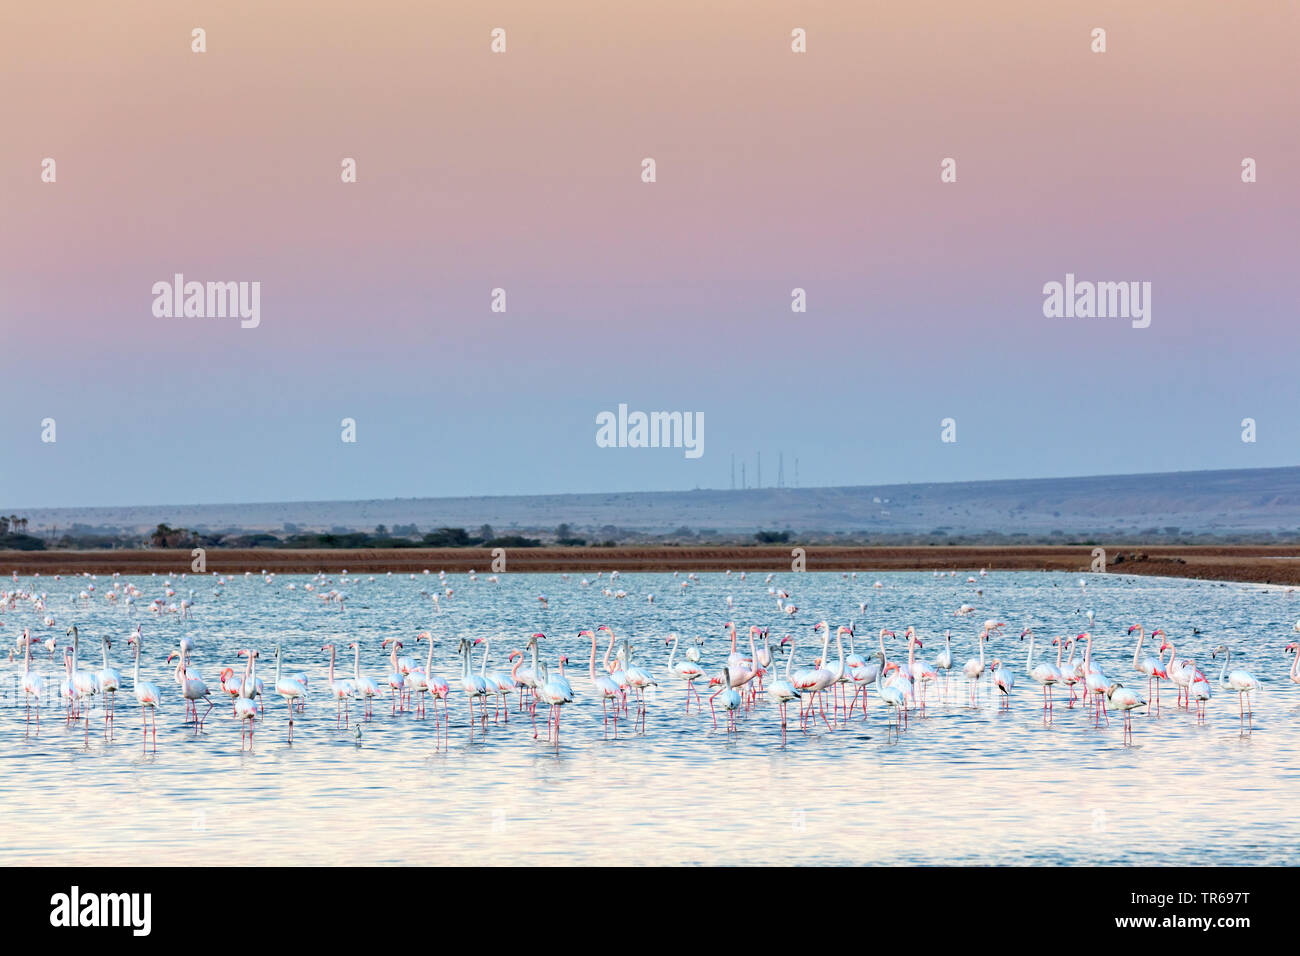 greater flamingo (Phoenicopterus roseus, Phoenicopterus ruber roseus), group in shallow water at red evening sky, Greece, Lesbos Stock Photo